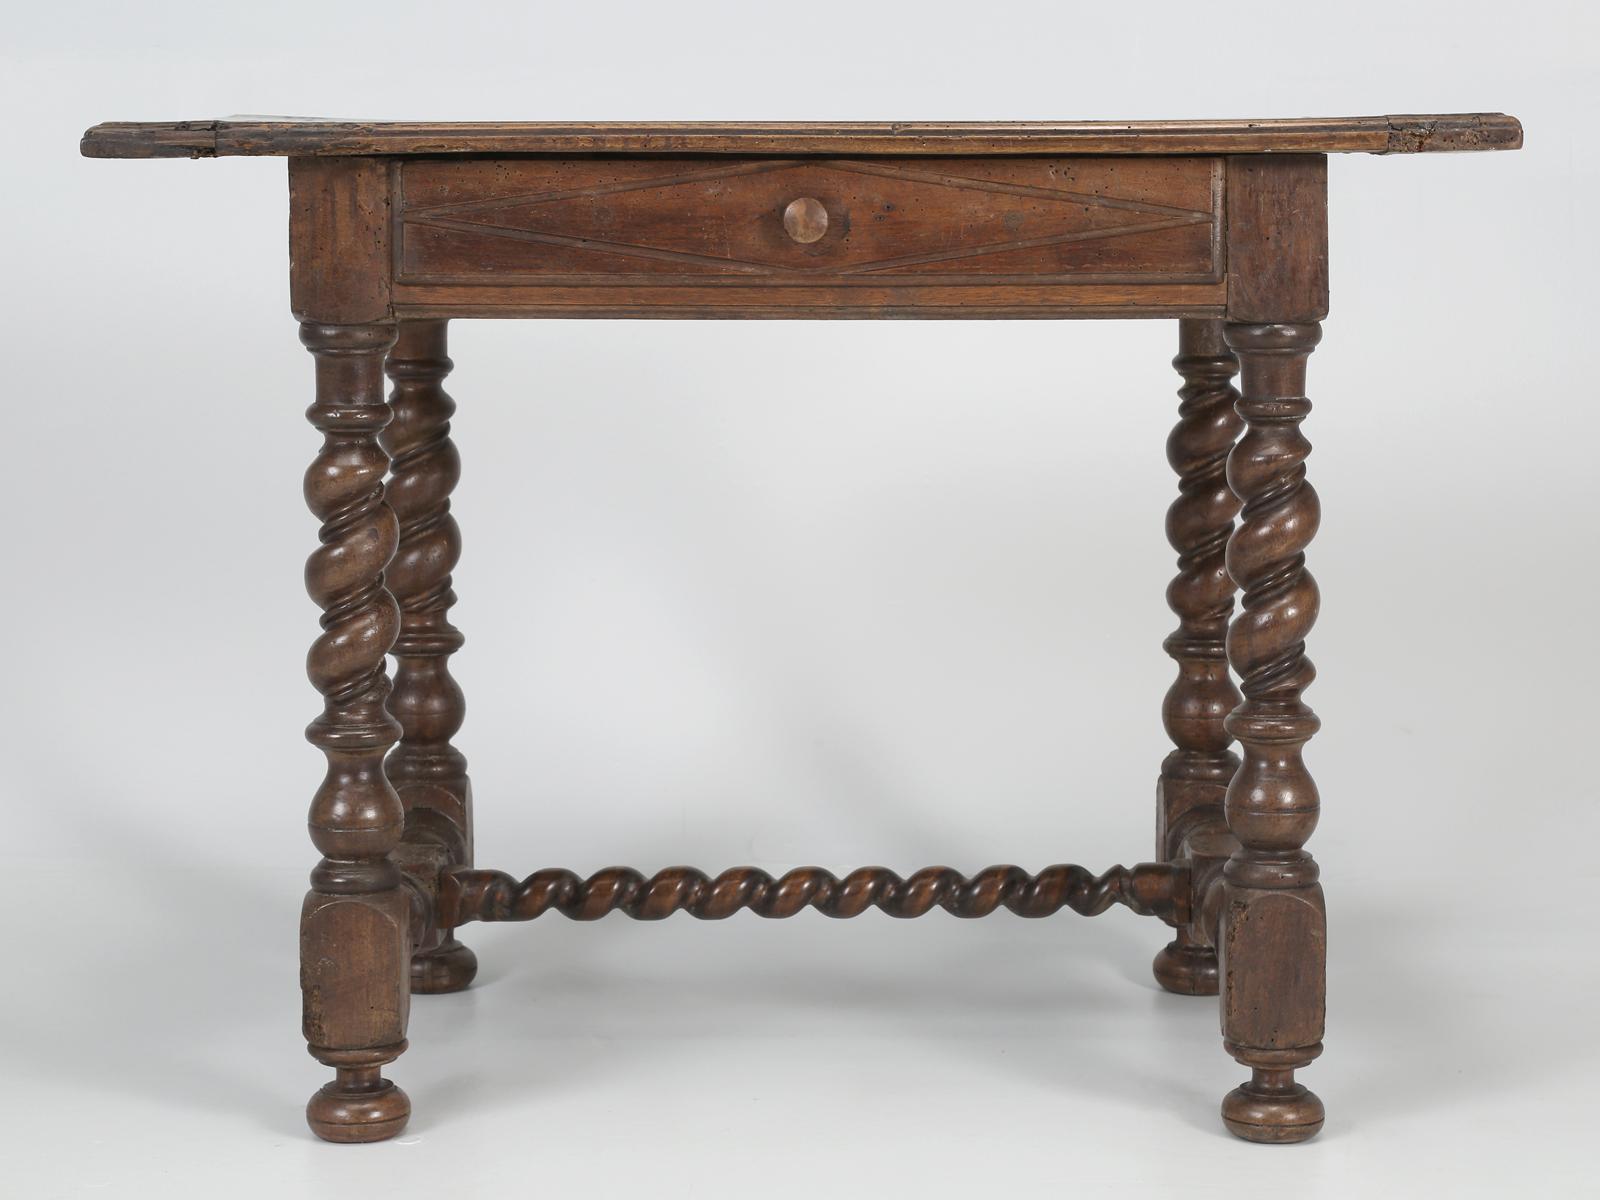 Beautiful late 1700's or early 1800's French ladies writing table or petite desk. Would also make for a great end table, or side table. The patina of this 200-year old walnut on our French small writing table or end table, is just something that you